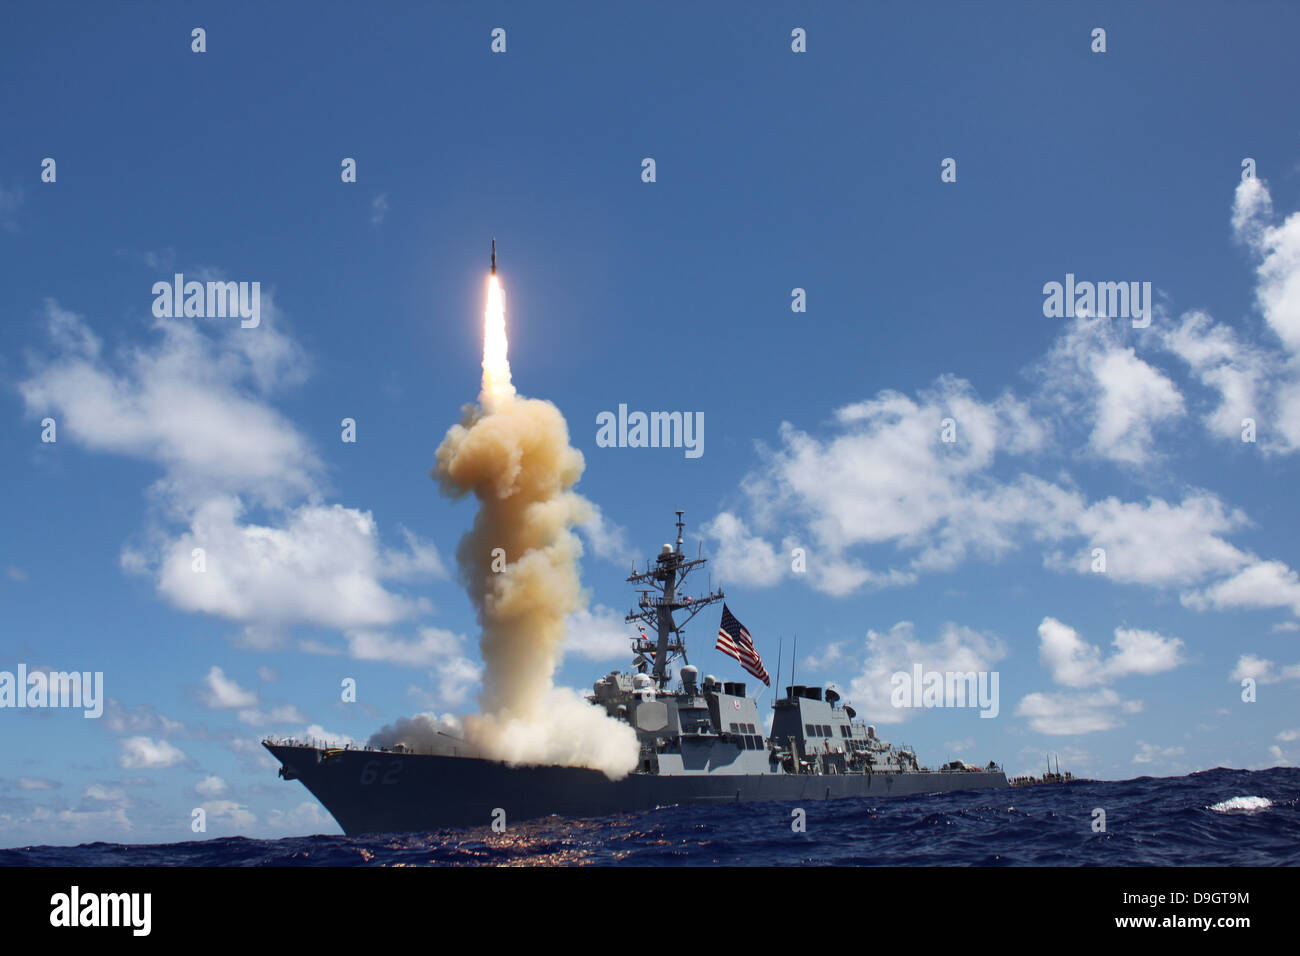 The guided-missile destroyer USS Fitzgerald launches a Standard Missile-3. Stock Photo